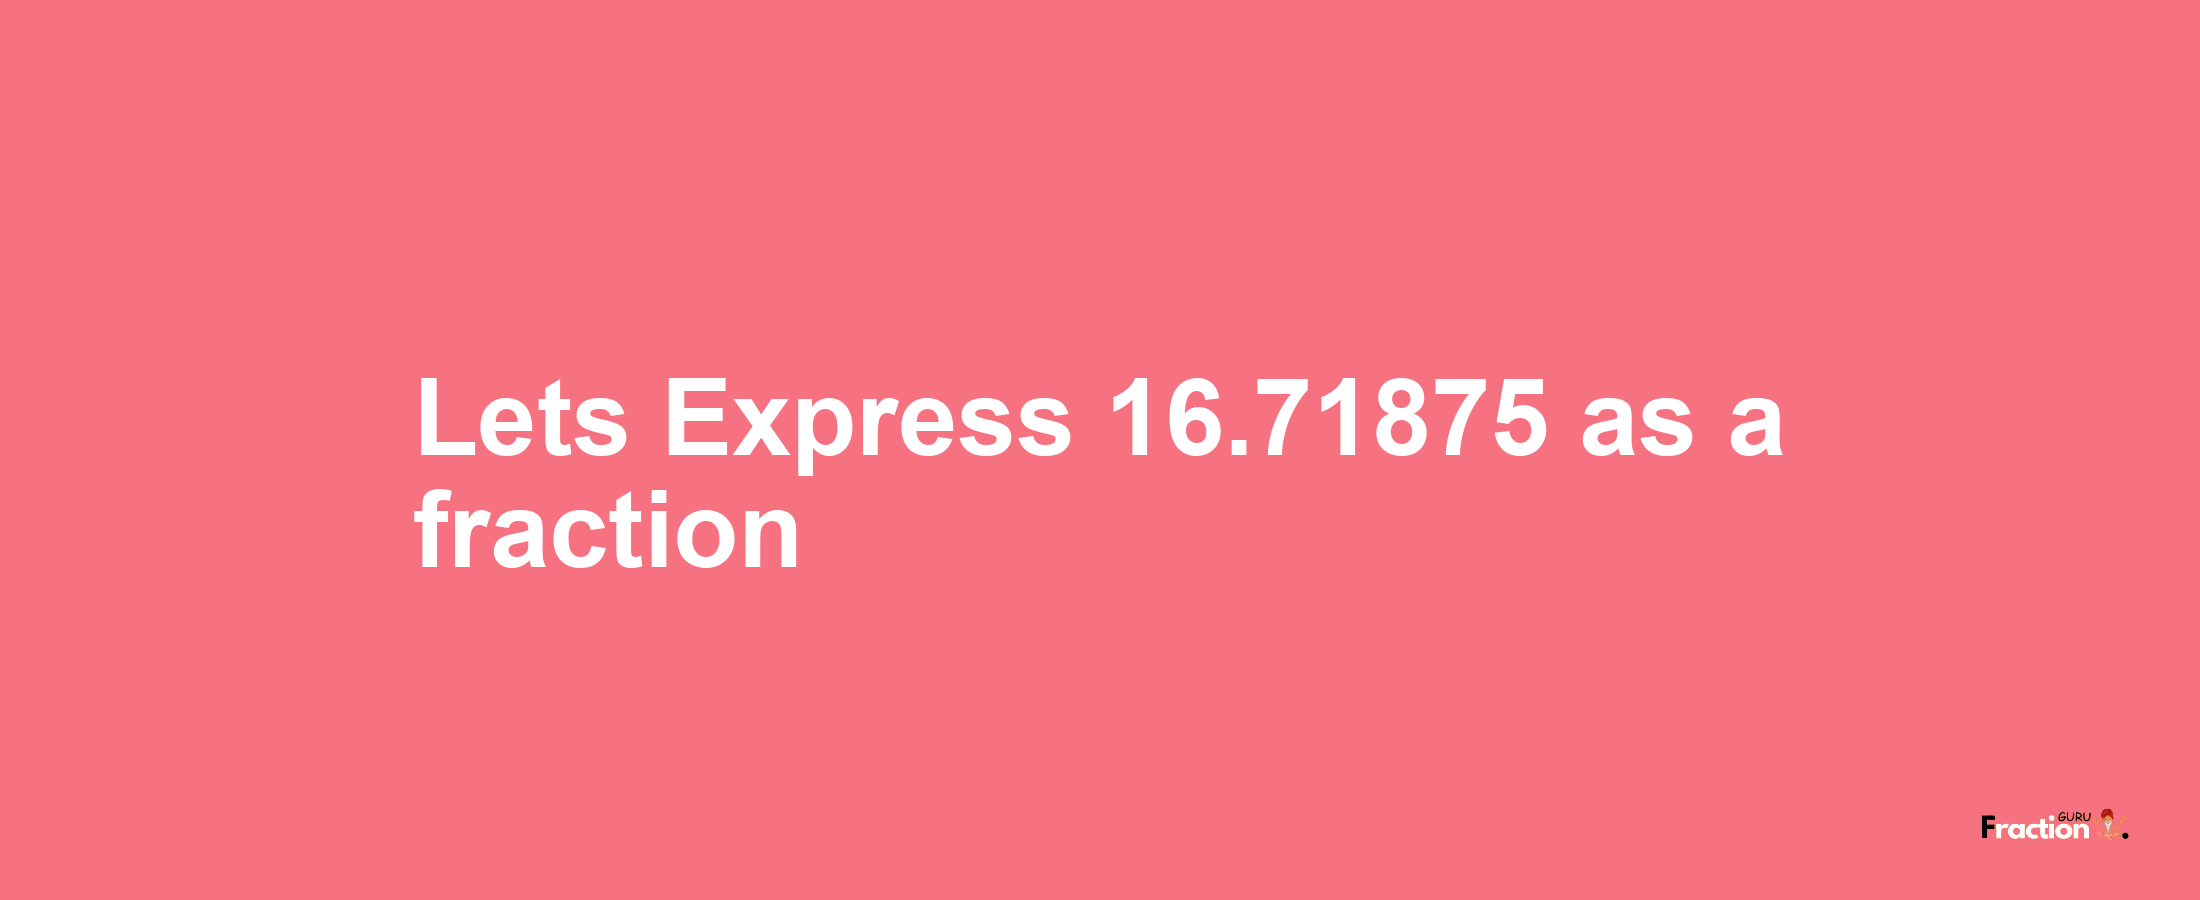 Lets Express 16.71875 as afraction